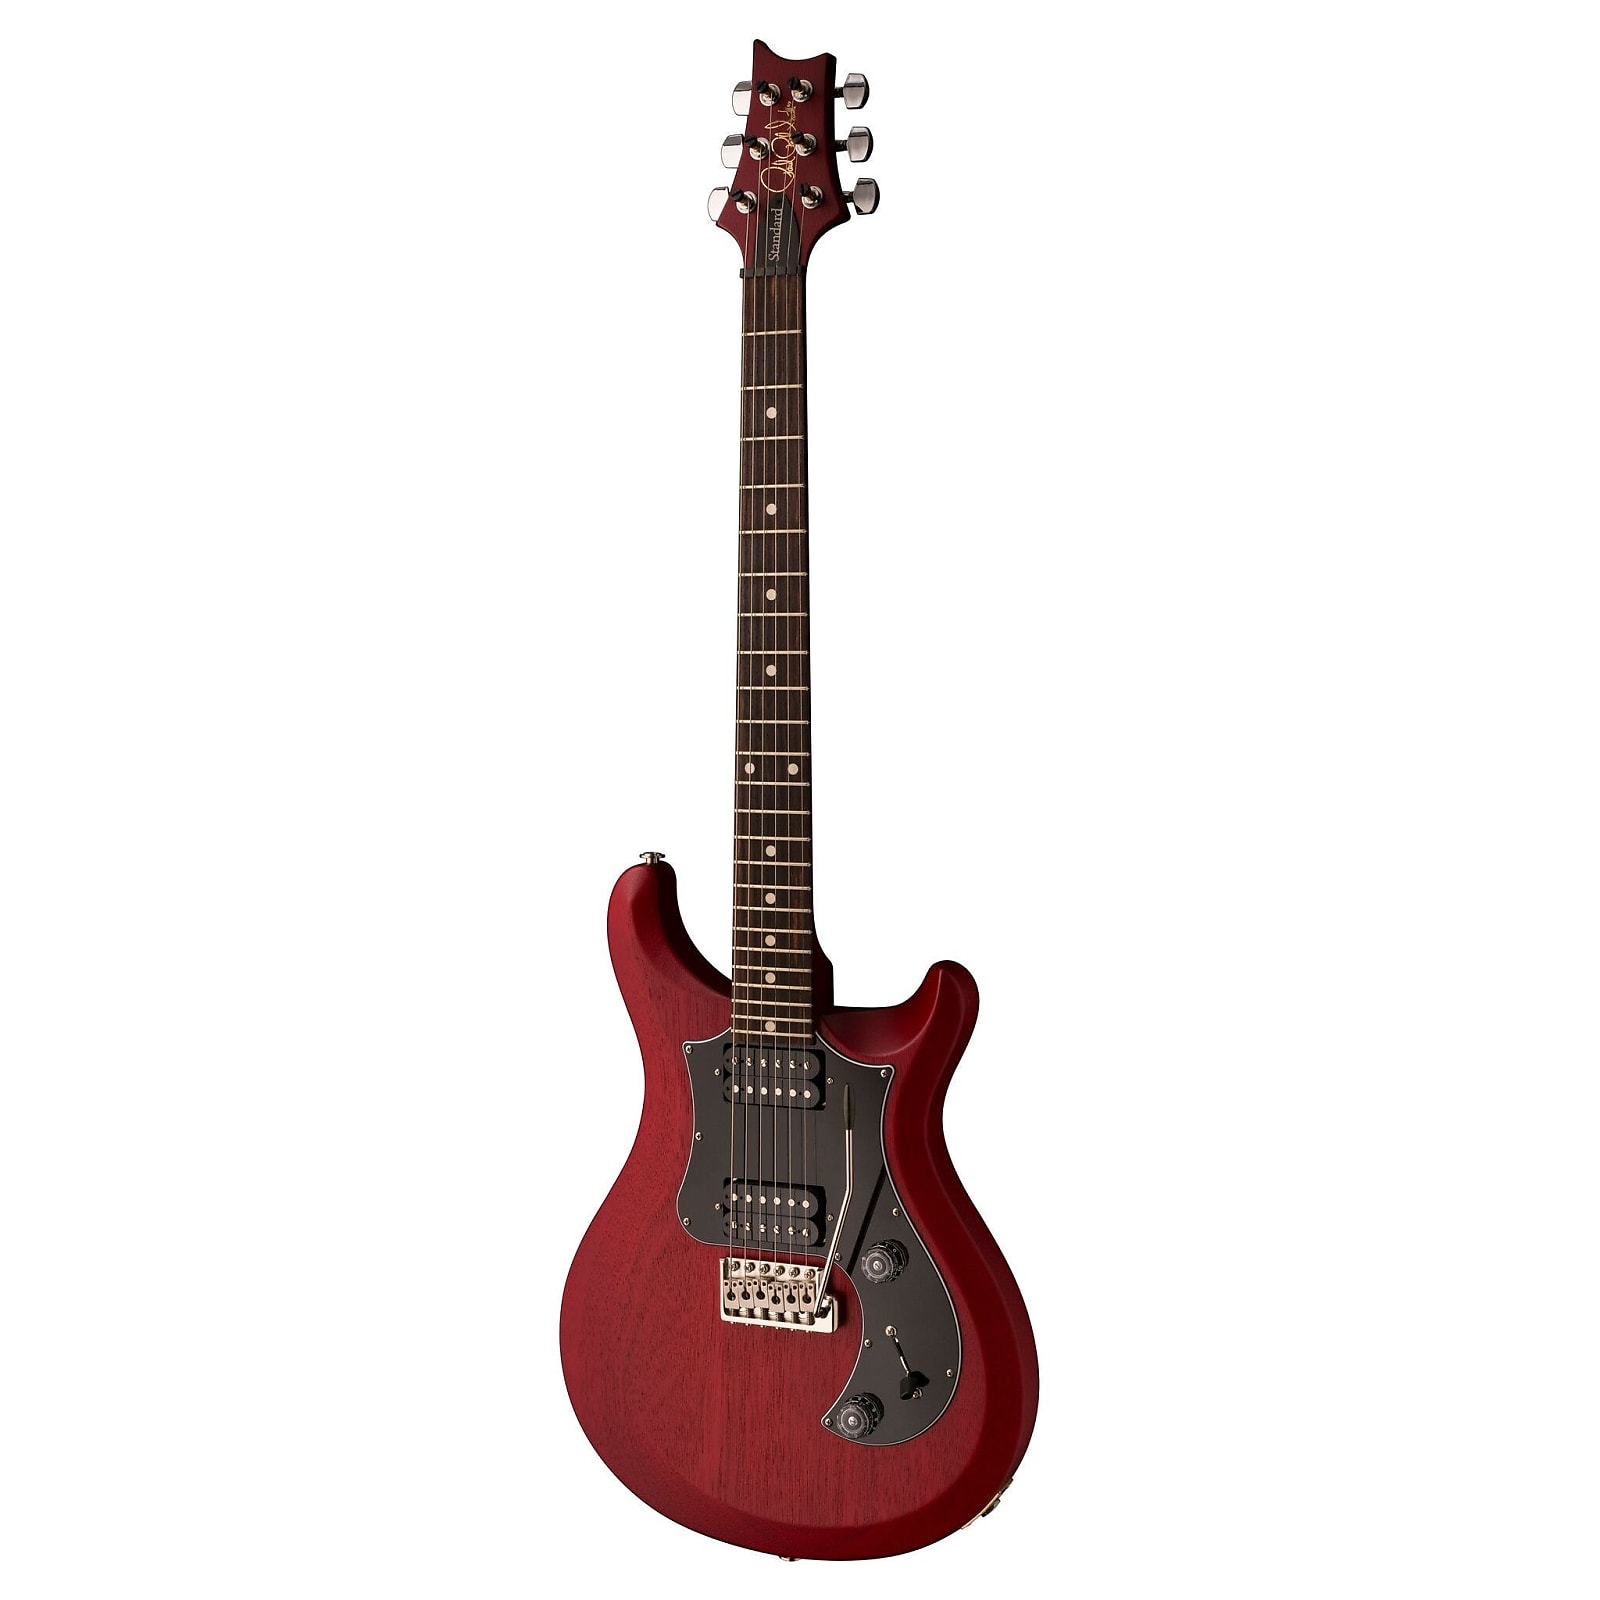 Paul Reed Smith PRS S2 Standard 24 Satin Electric Guitar Vintage Cherry Satin